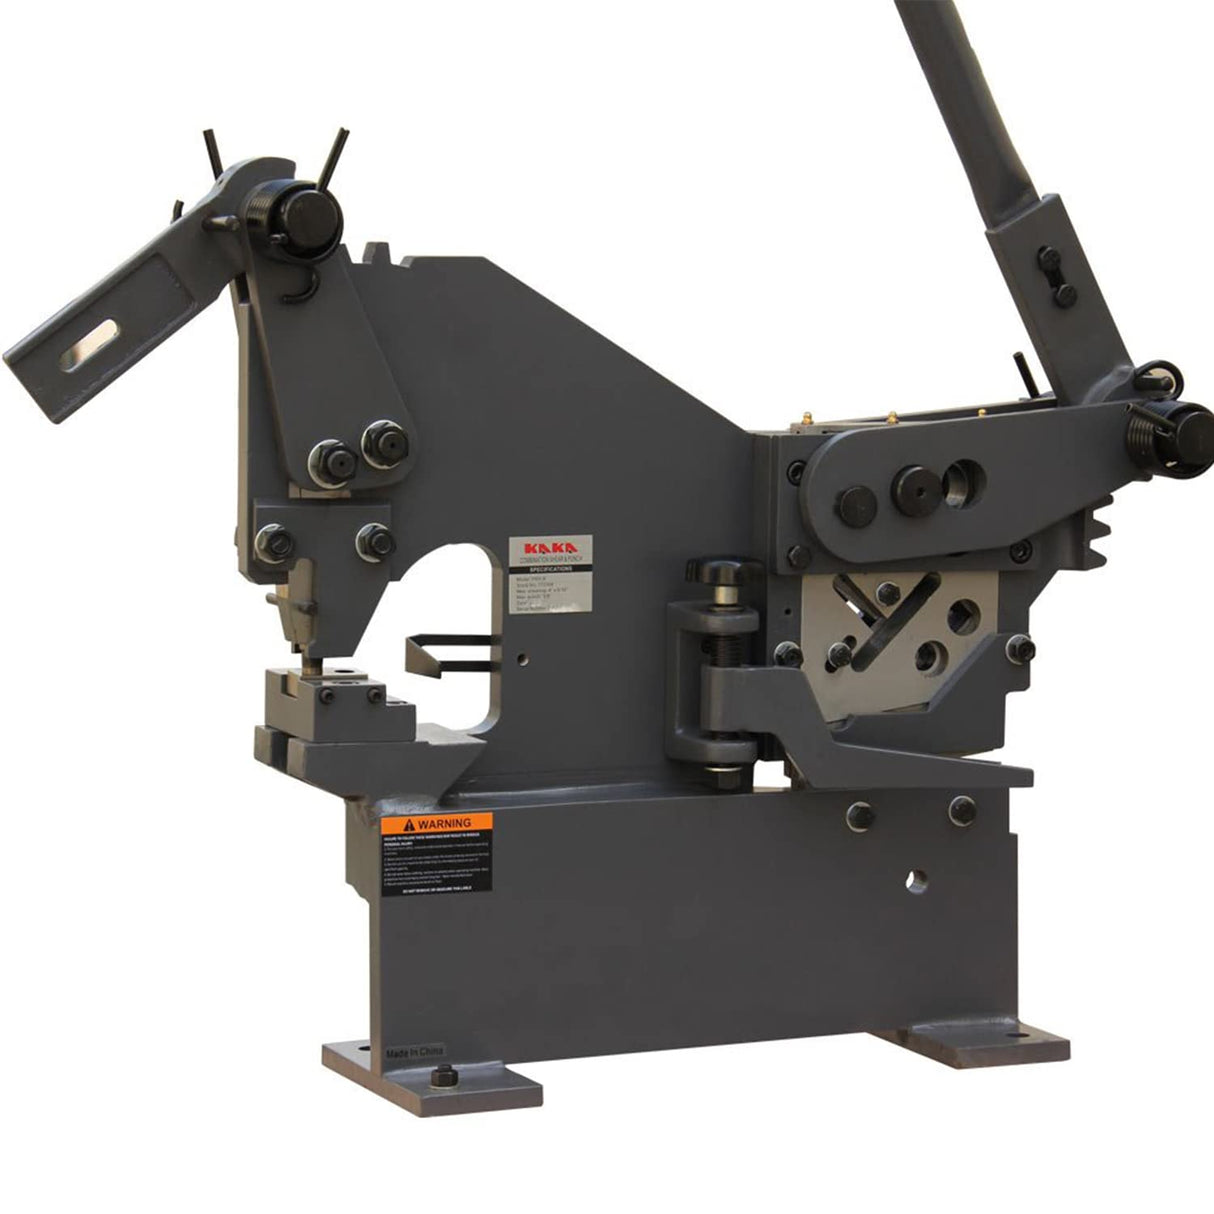 KANG Industrial PBS-9 Manual IronWorker, Manual Ironworker With Punch, Bar And Section Shear machine